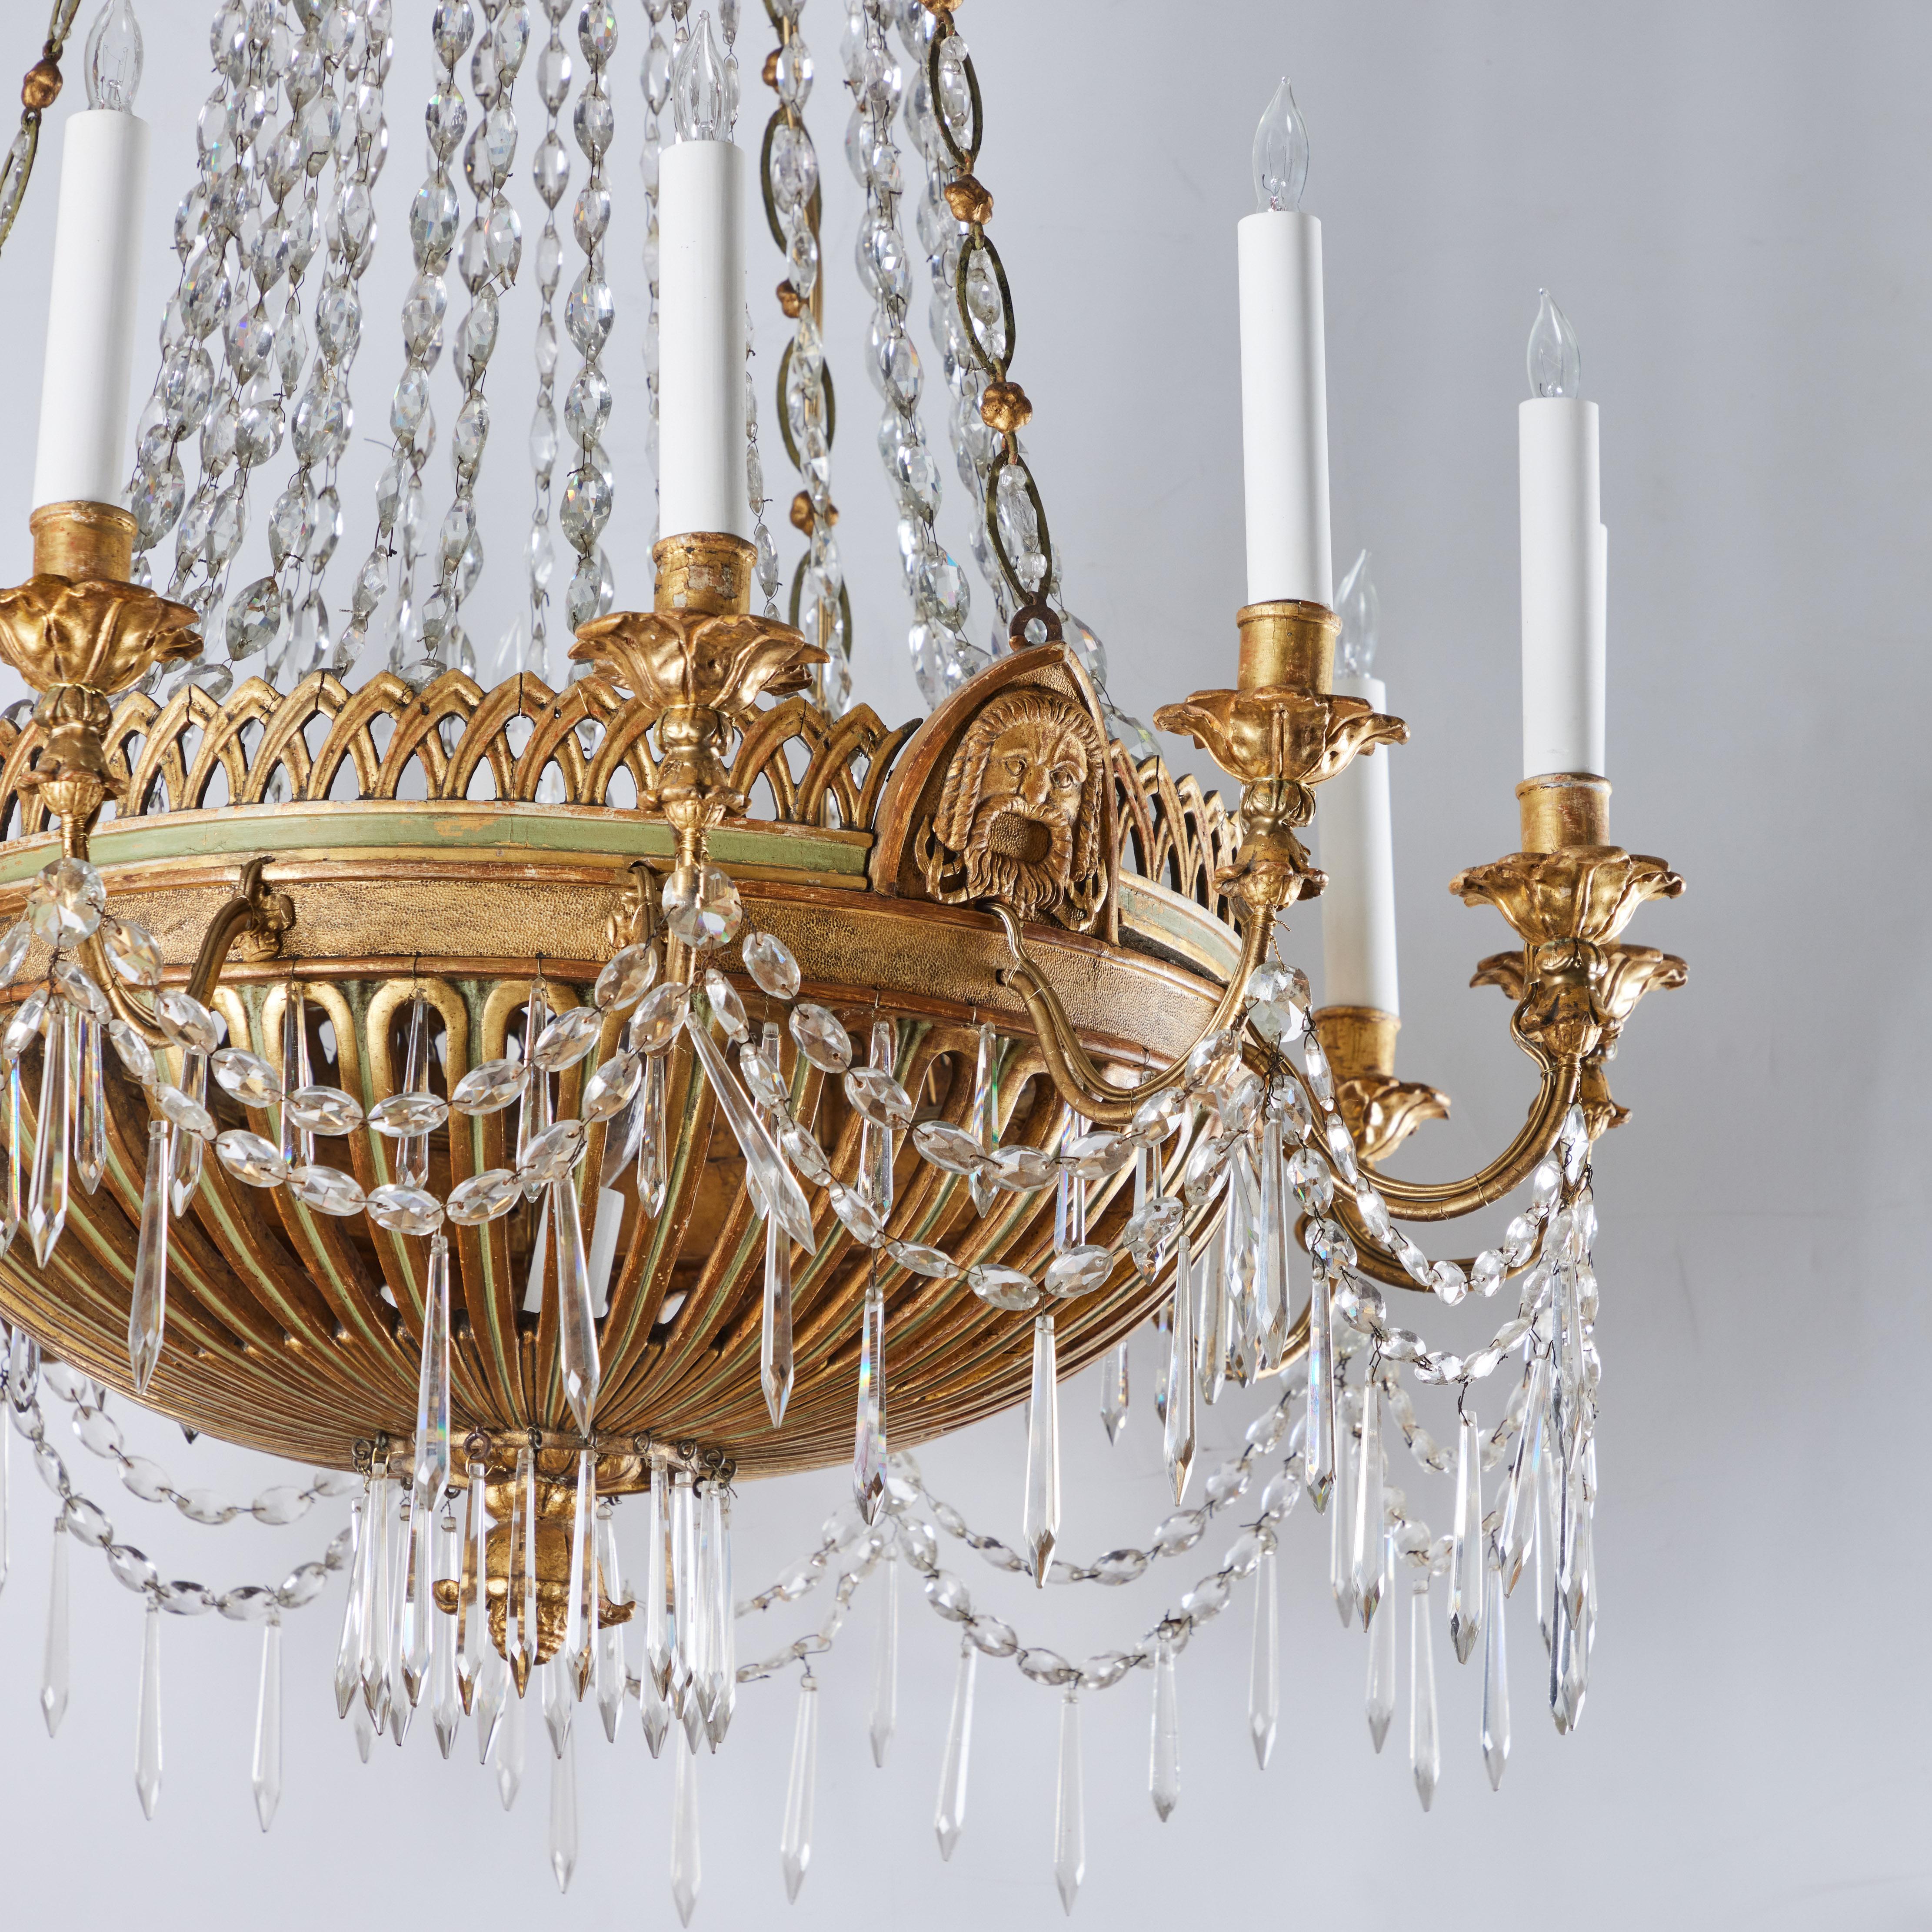 Gilt-wood and Crystal Chandelier In Good Condition For Sale In Newport Beach, CA